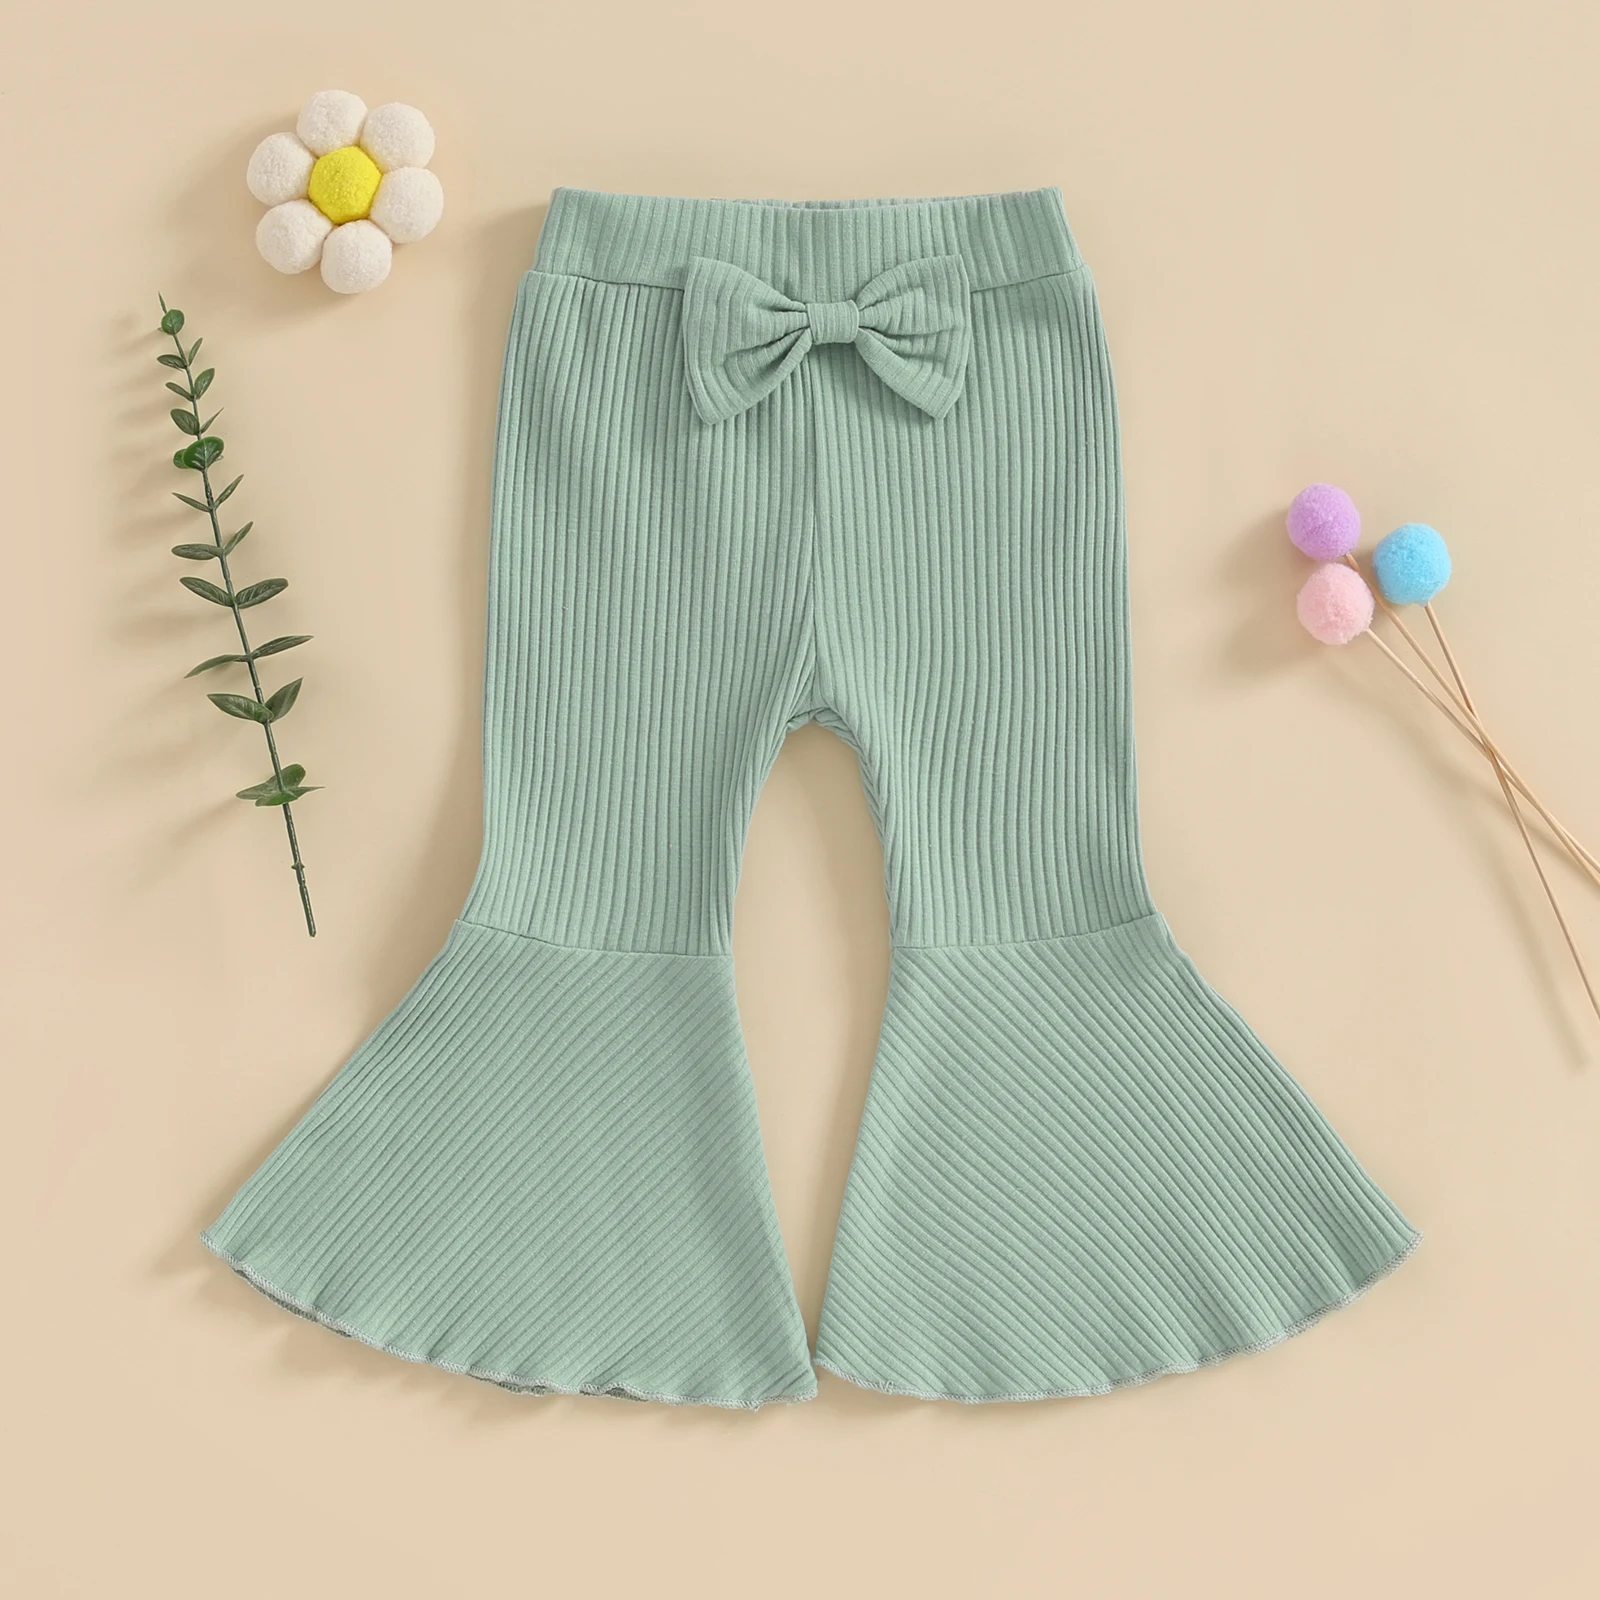 Sd8ef6b959f0f4e7683f923a23ad0c4e7w Cute Kids Baby Girls Flare Pants Soft Cotton Solid Color Ribbed Elastic Toddler Bell Bottoms Trousers Bow Ruffle Pants for Child